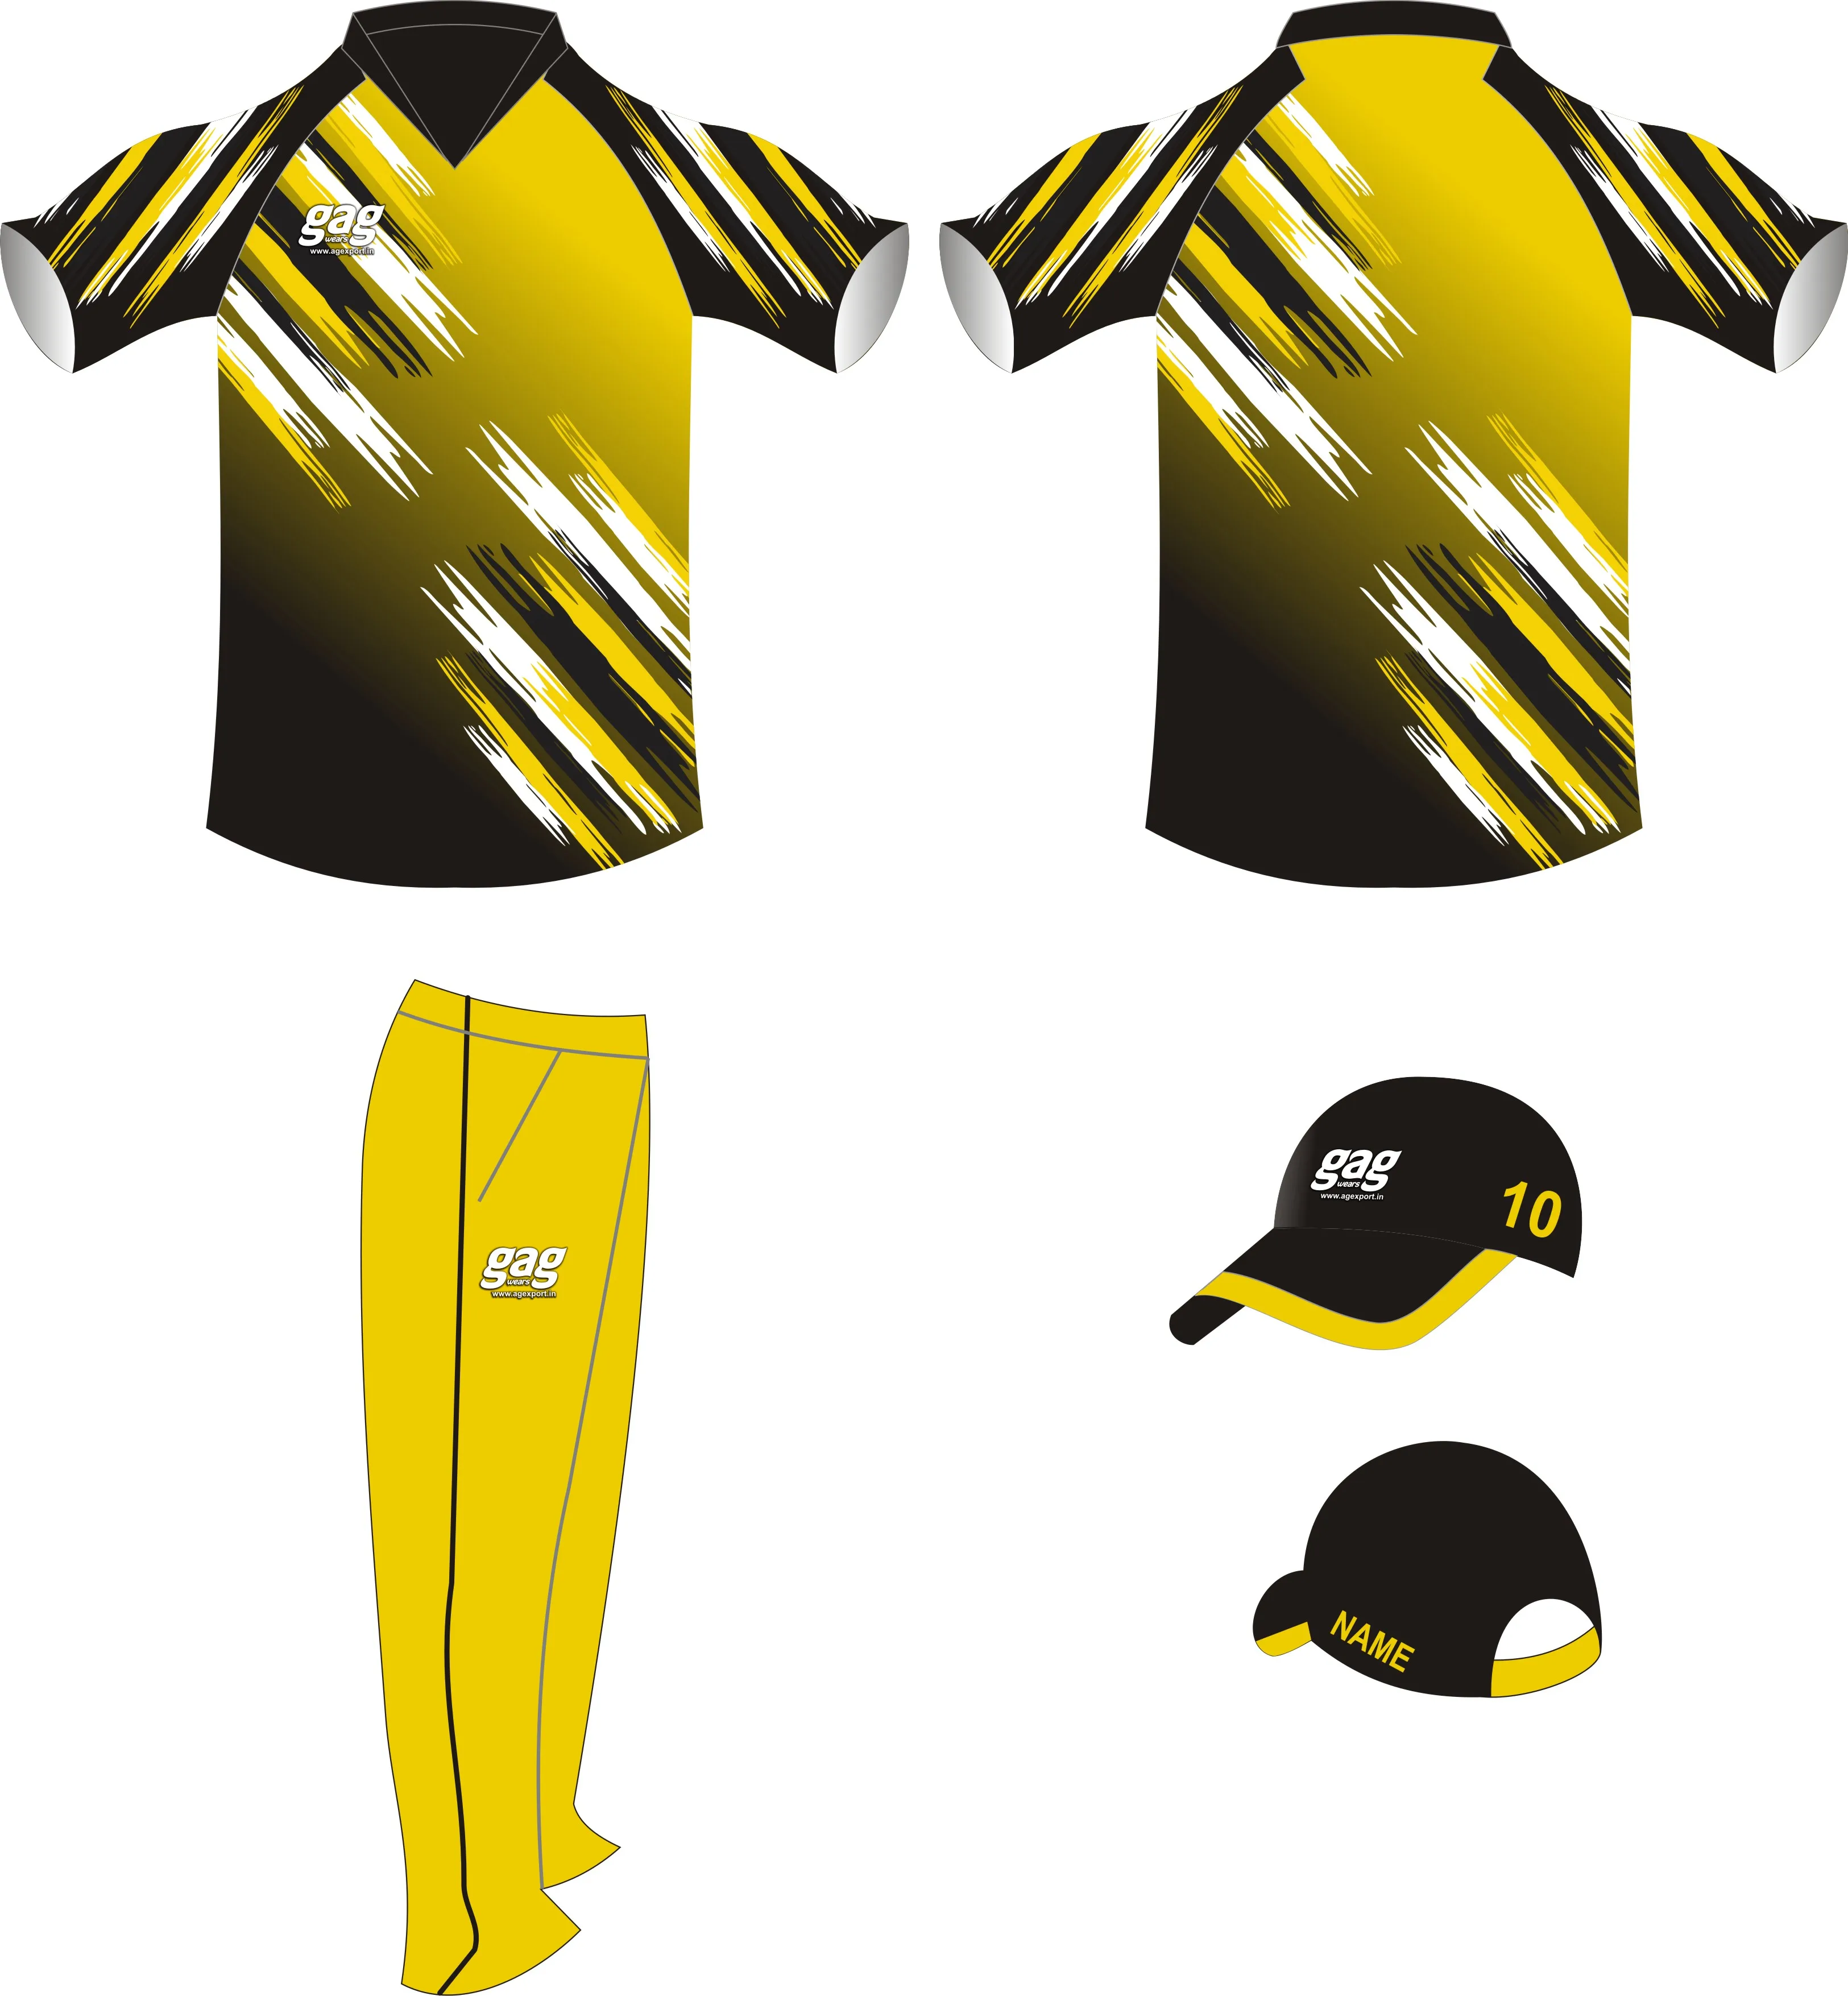 shirts for cricket